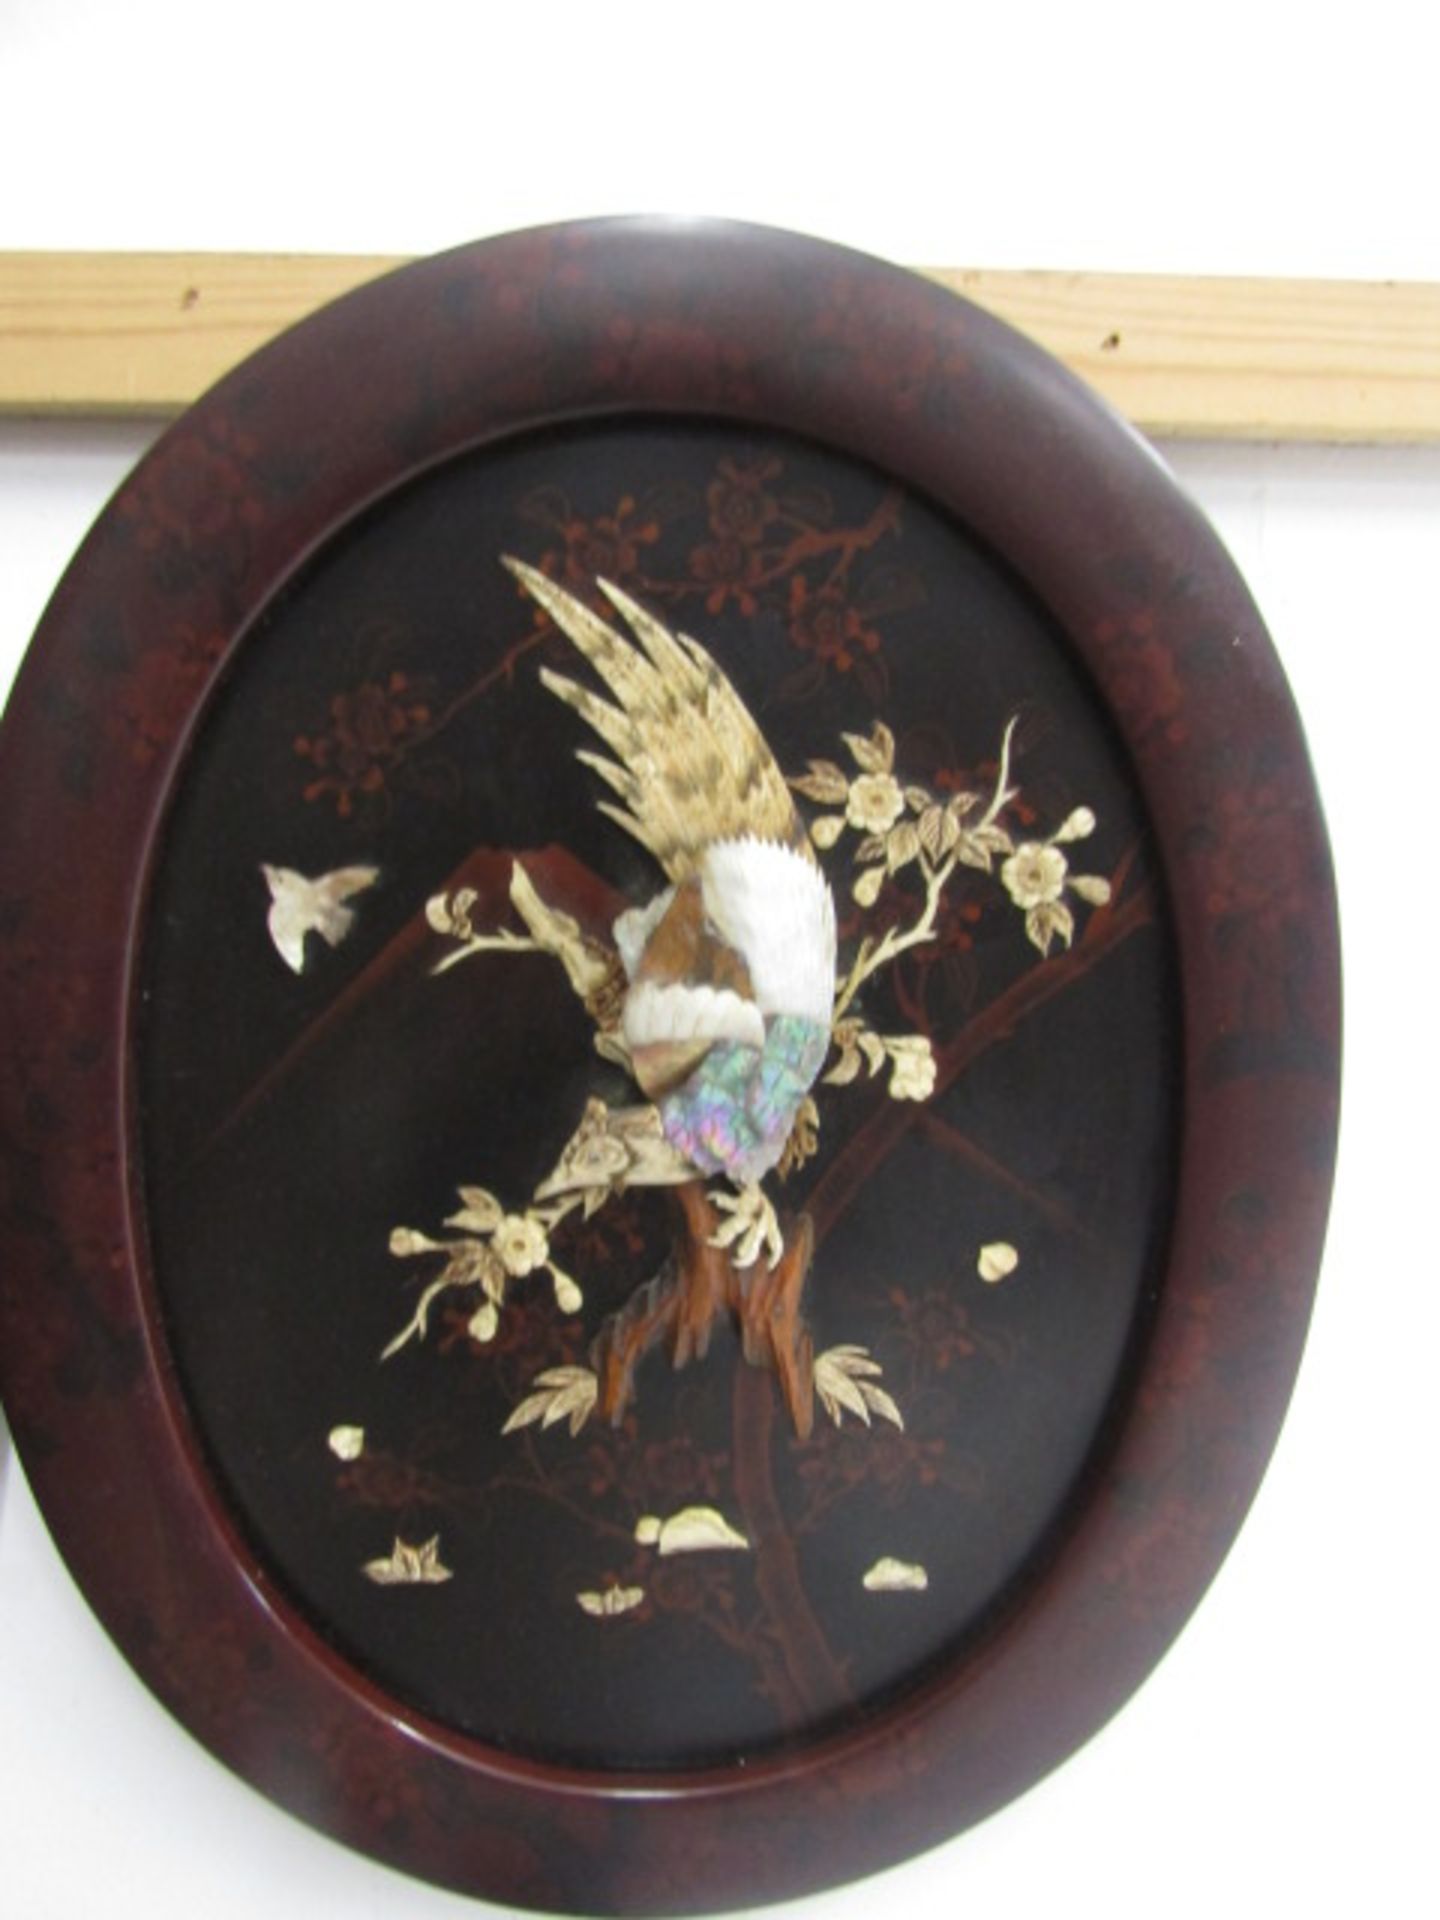 2 Shibayama plaques of birds in mother of pearl 3D design with lacquered style frames 54cmH - Image 3 of 5